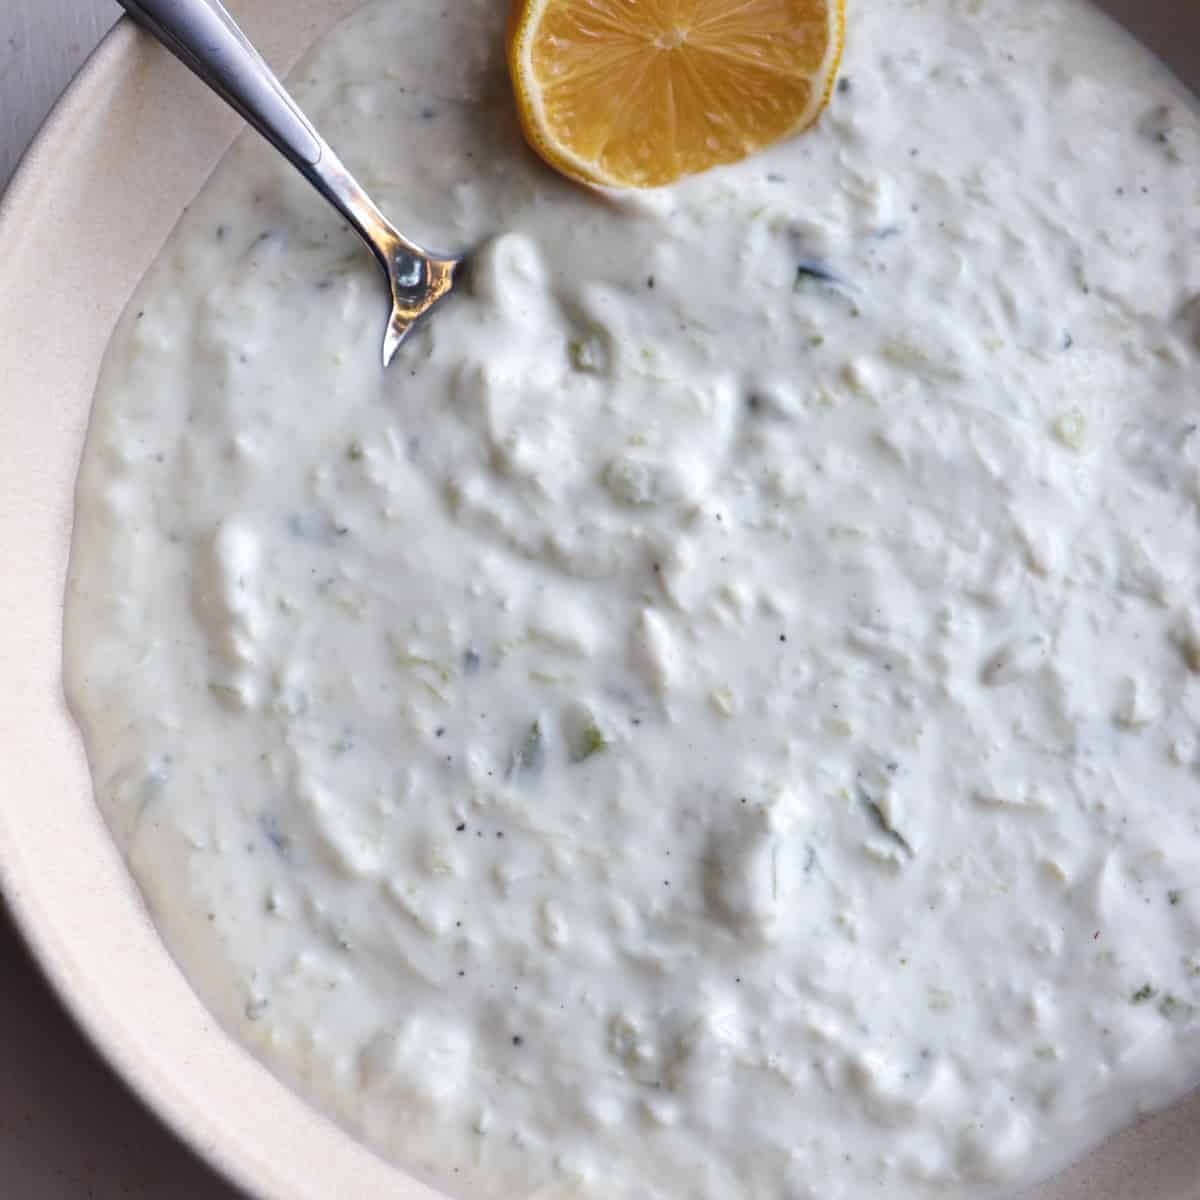 tzatziki sauce in a low bowl garnished with a lemon